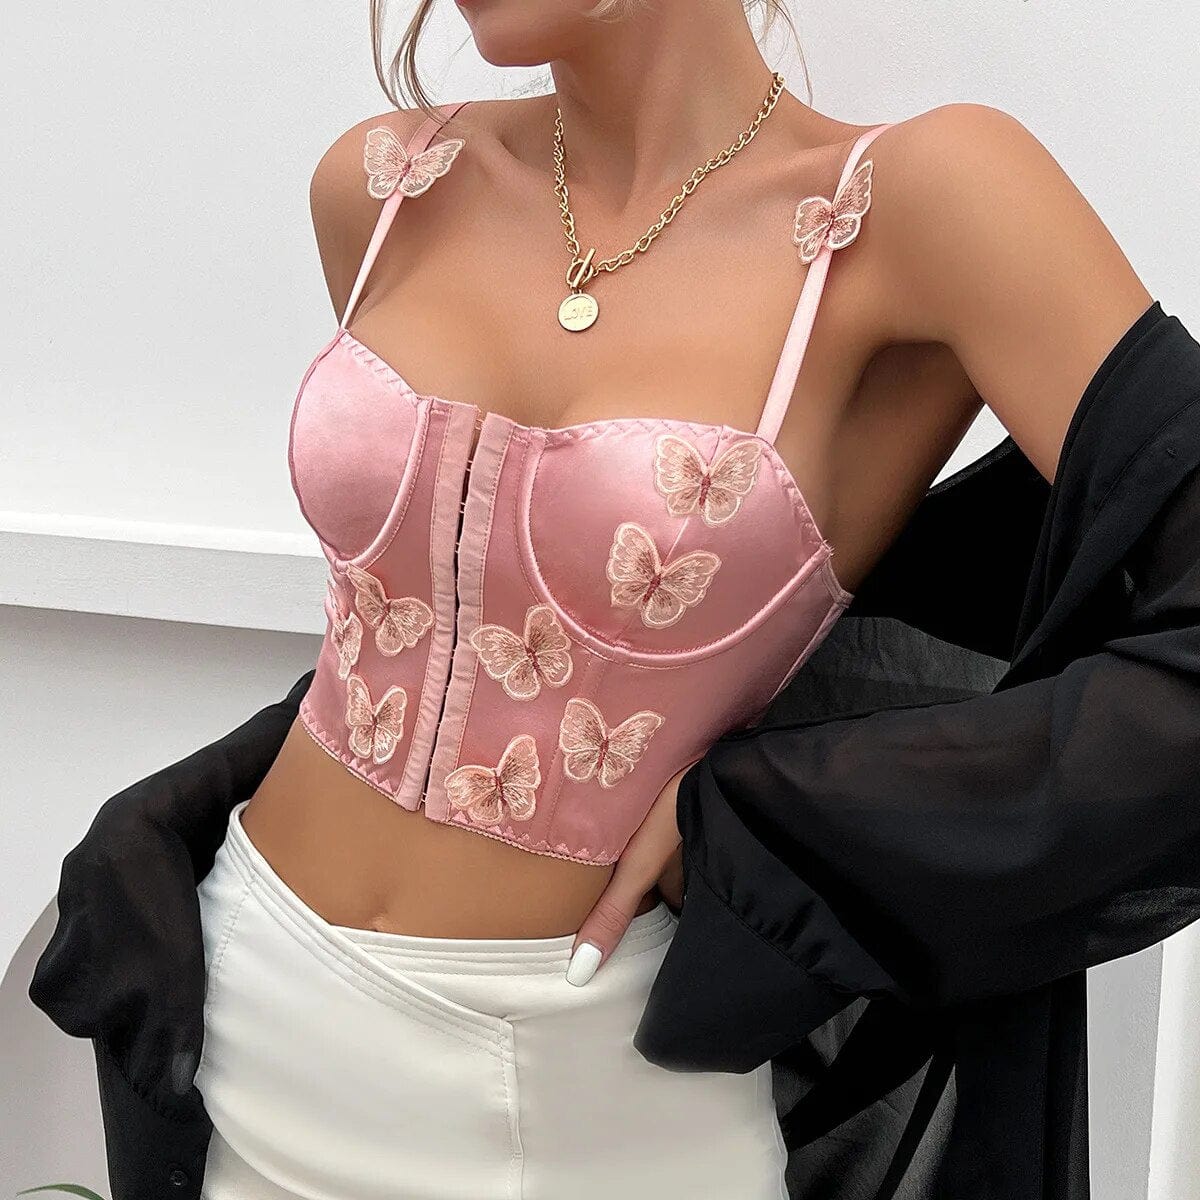 Kinky Cloth Butterfly Corset Crop Top